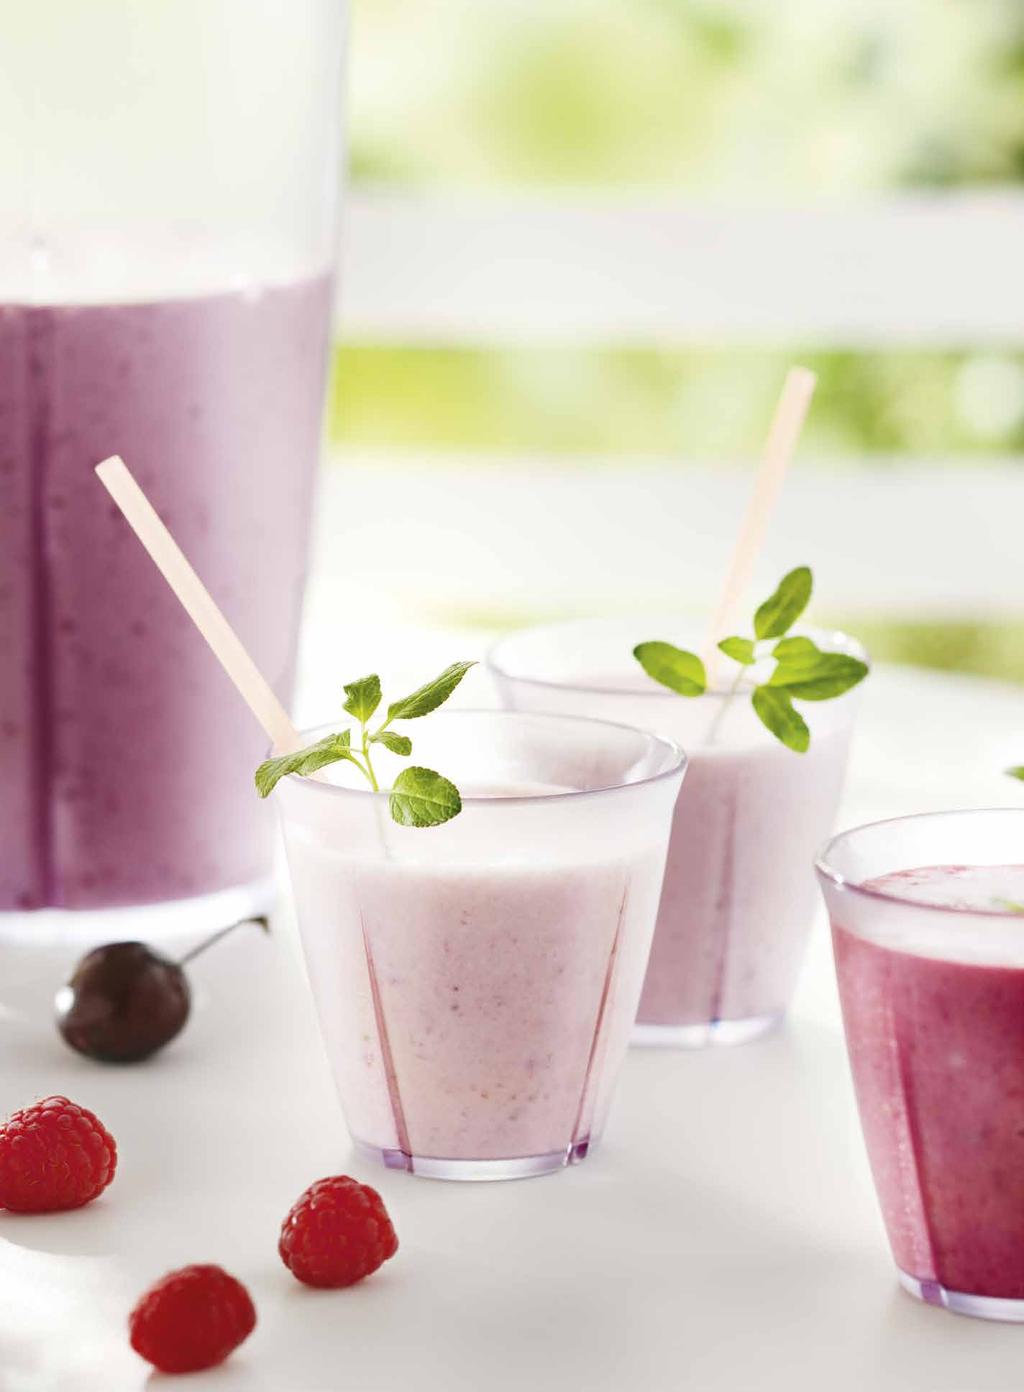 Start the day with a smoothie or serve it